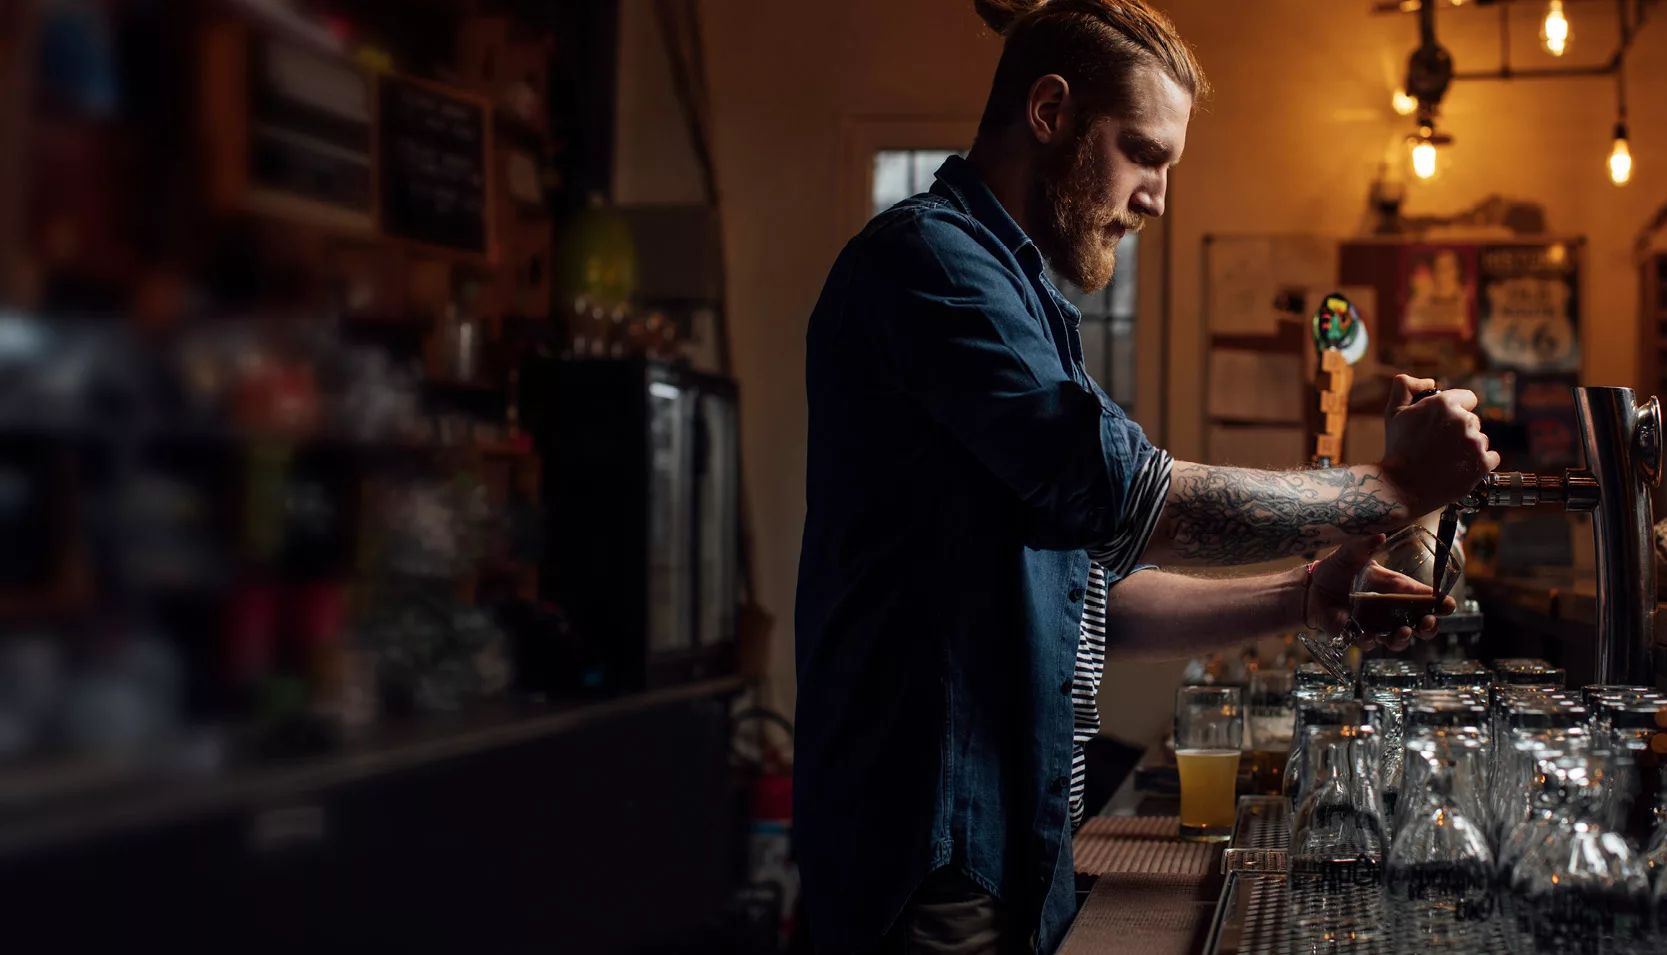 A man pours a beer in a bar environment